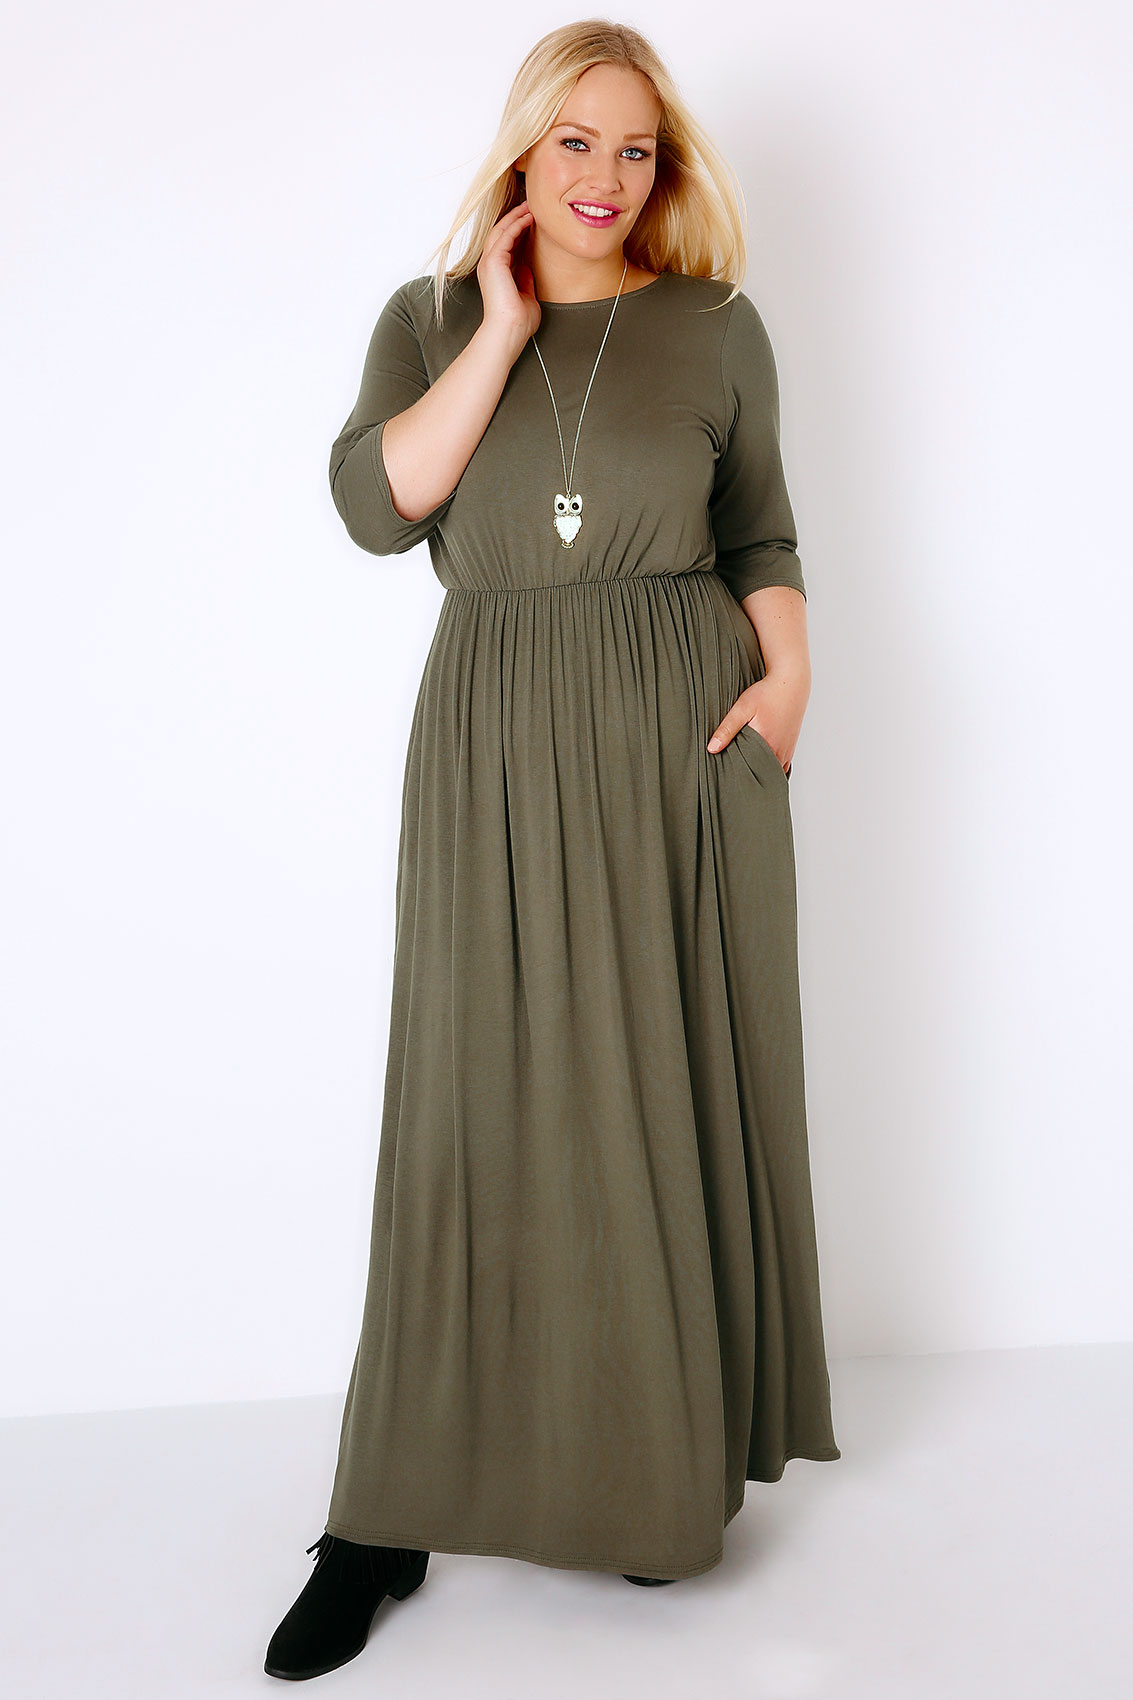 Khaki Jersey Maxi Dress With Ruched Waist, Plus size 16 to 32